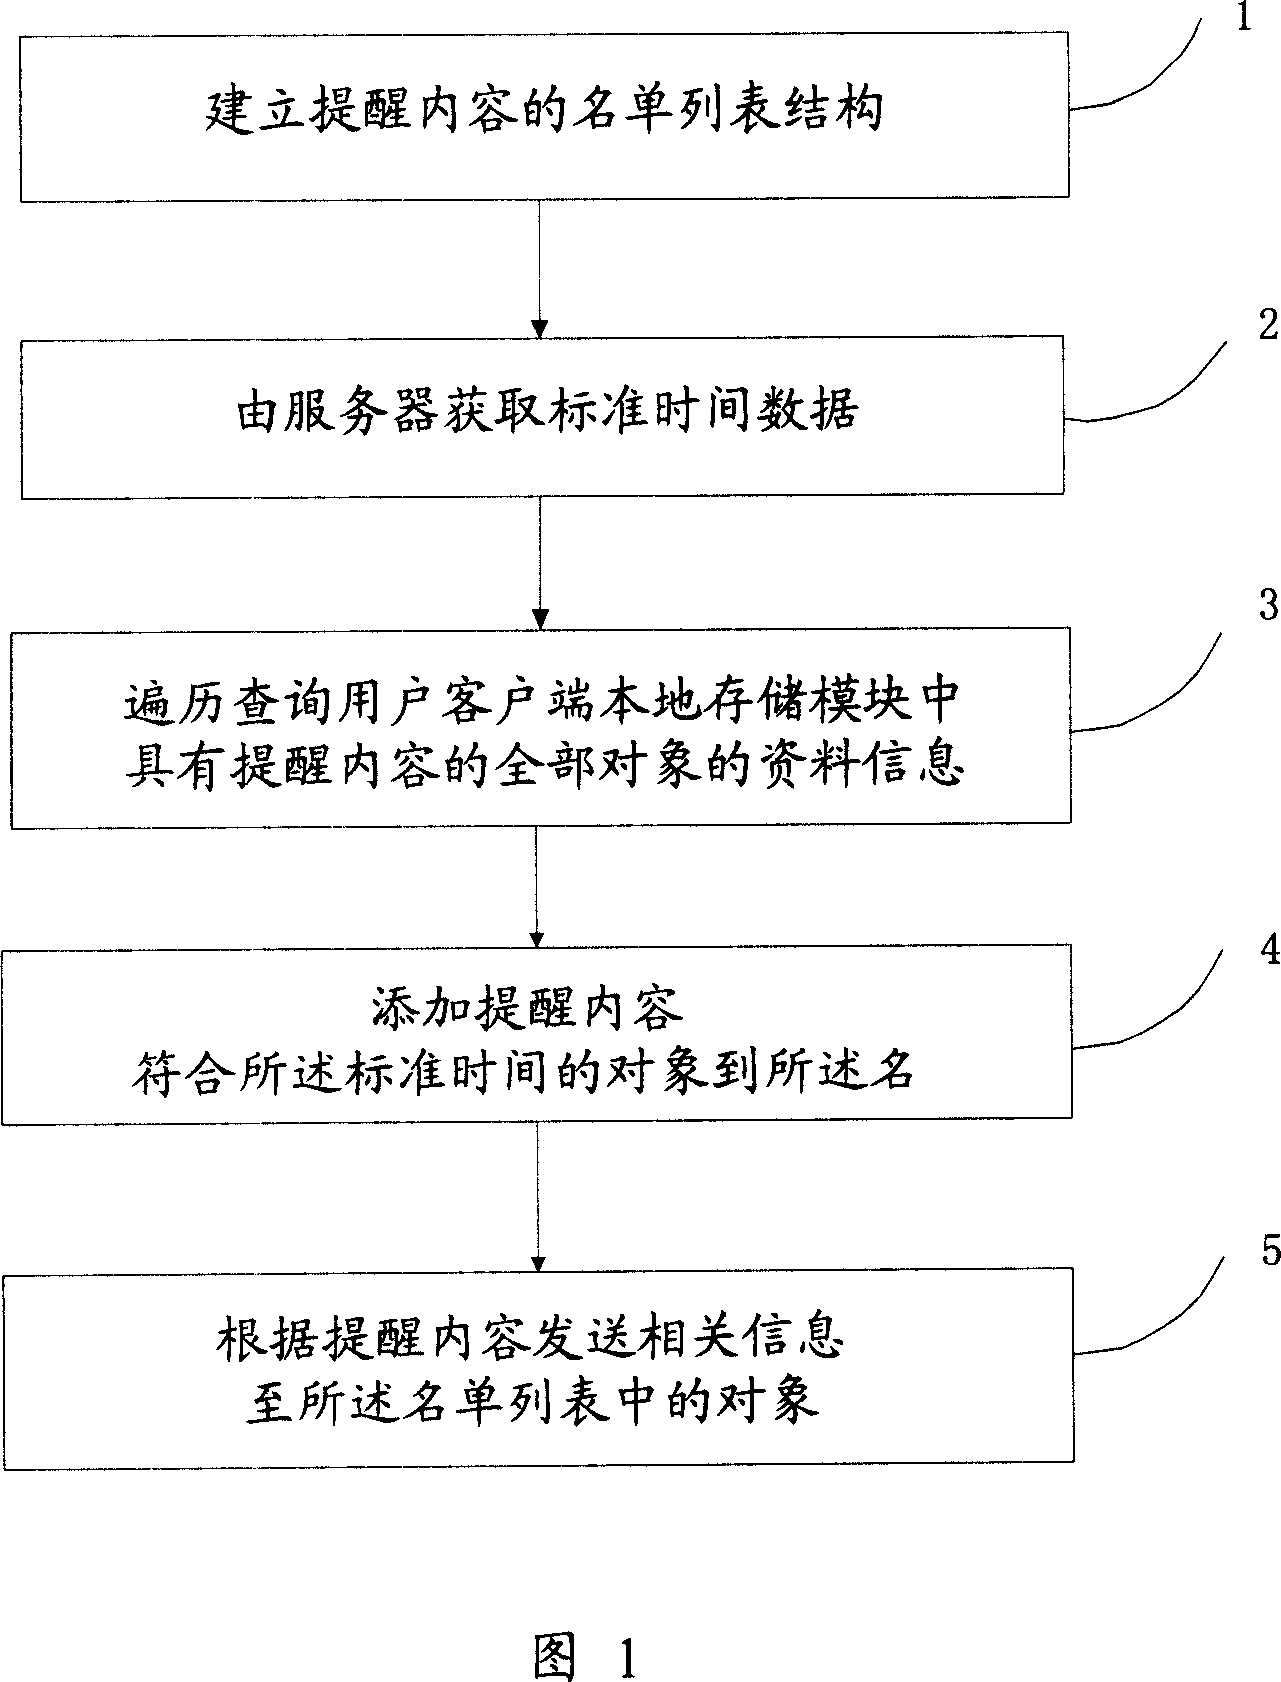 Method and system for realizing prompt inform based on instant communication